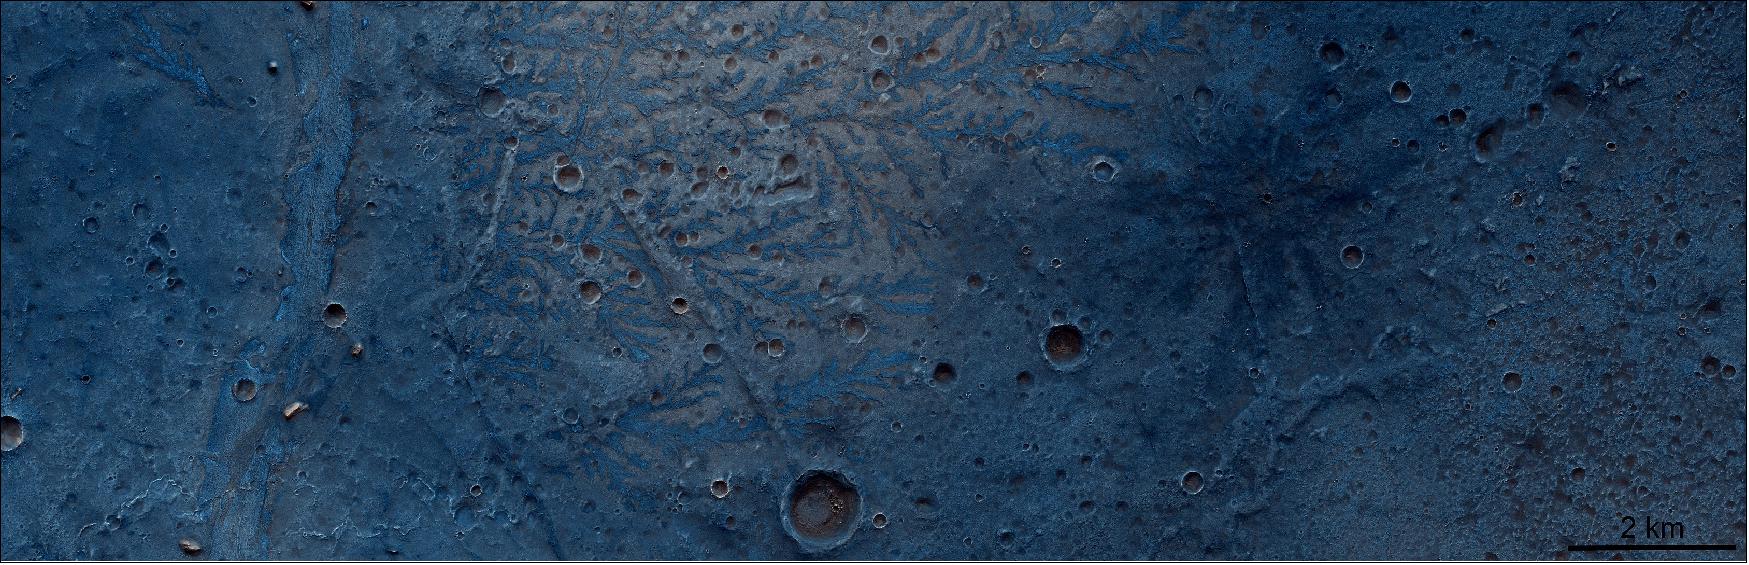 Figure 42: Leaf-like structures in Antoniadi impact crater. This image, captured on 25 March 2020, shows the bottom of the 400 km in diameter Antoniadi impact crater, which is located in the northern hemisphere of Mars in the Syrtis Major Planum region. The blue color of the image, centered at 21.0ºN, 61.2ºE, does not represent the real color of the crater floor but highlights the diversity of the rock composition inside the impact crater (image credit: ESA/ExoMars/CaSSIS)